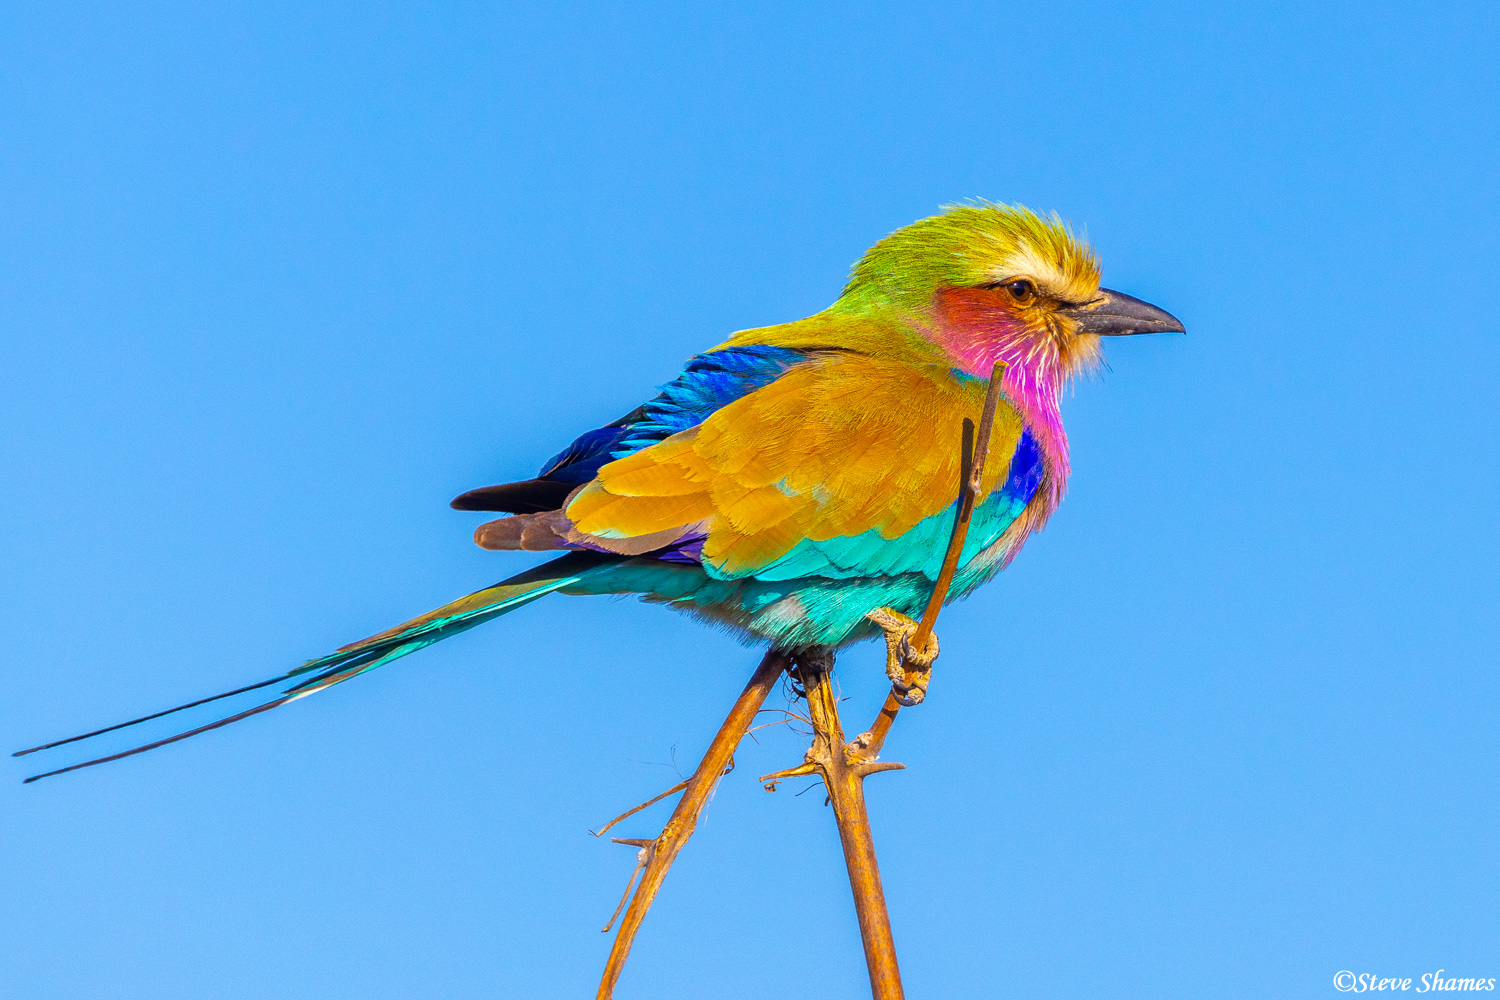 Another colorful African bird. Botswana has the most colorful birds I have ever seen.